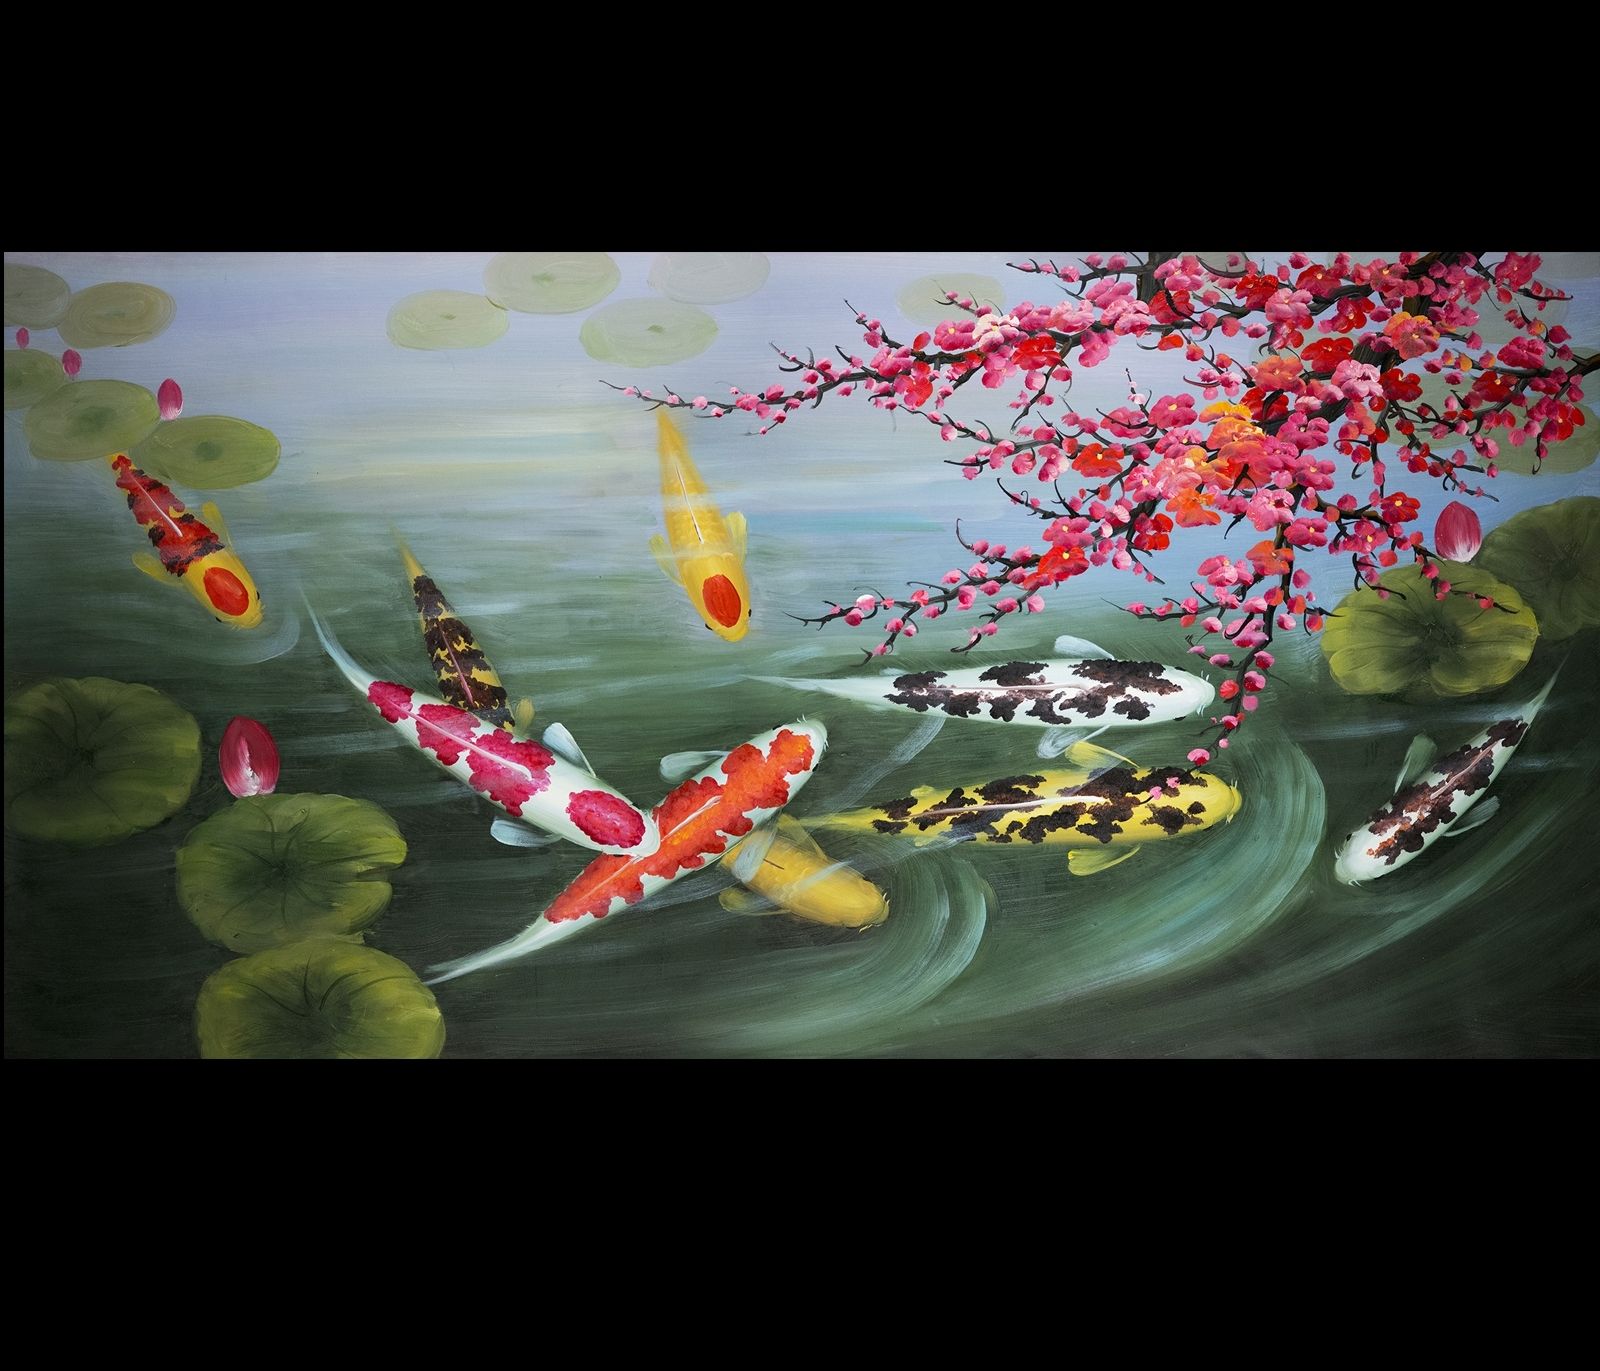 Art Painting Stretched Canvas Print Koi Fish Wall Art – Super Tech Inside Widely Used Fish Painting Wall Art (View 14 of 15)